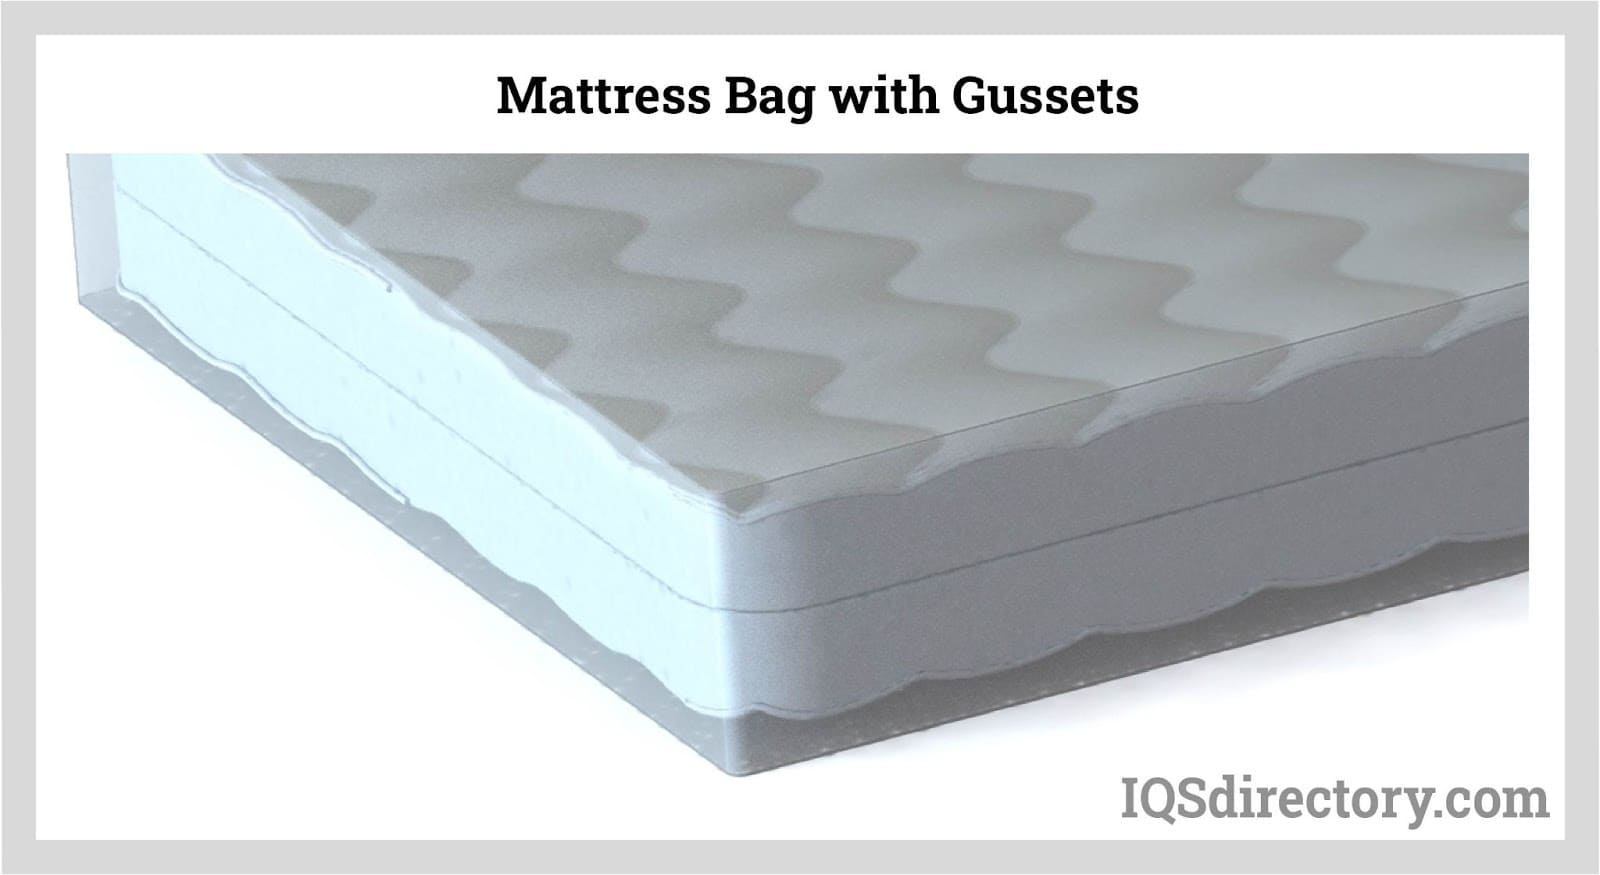 Mattress Bag with Gussets